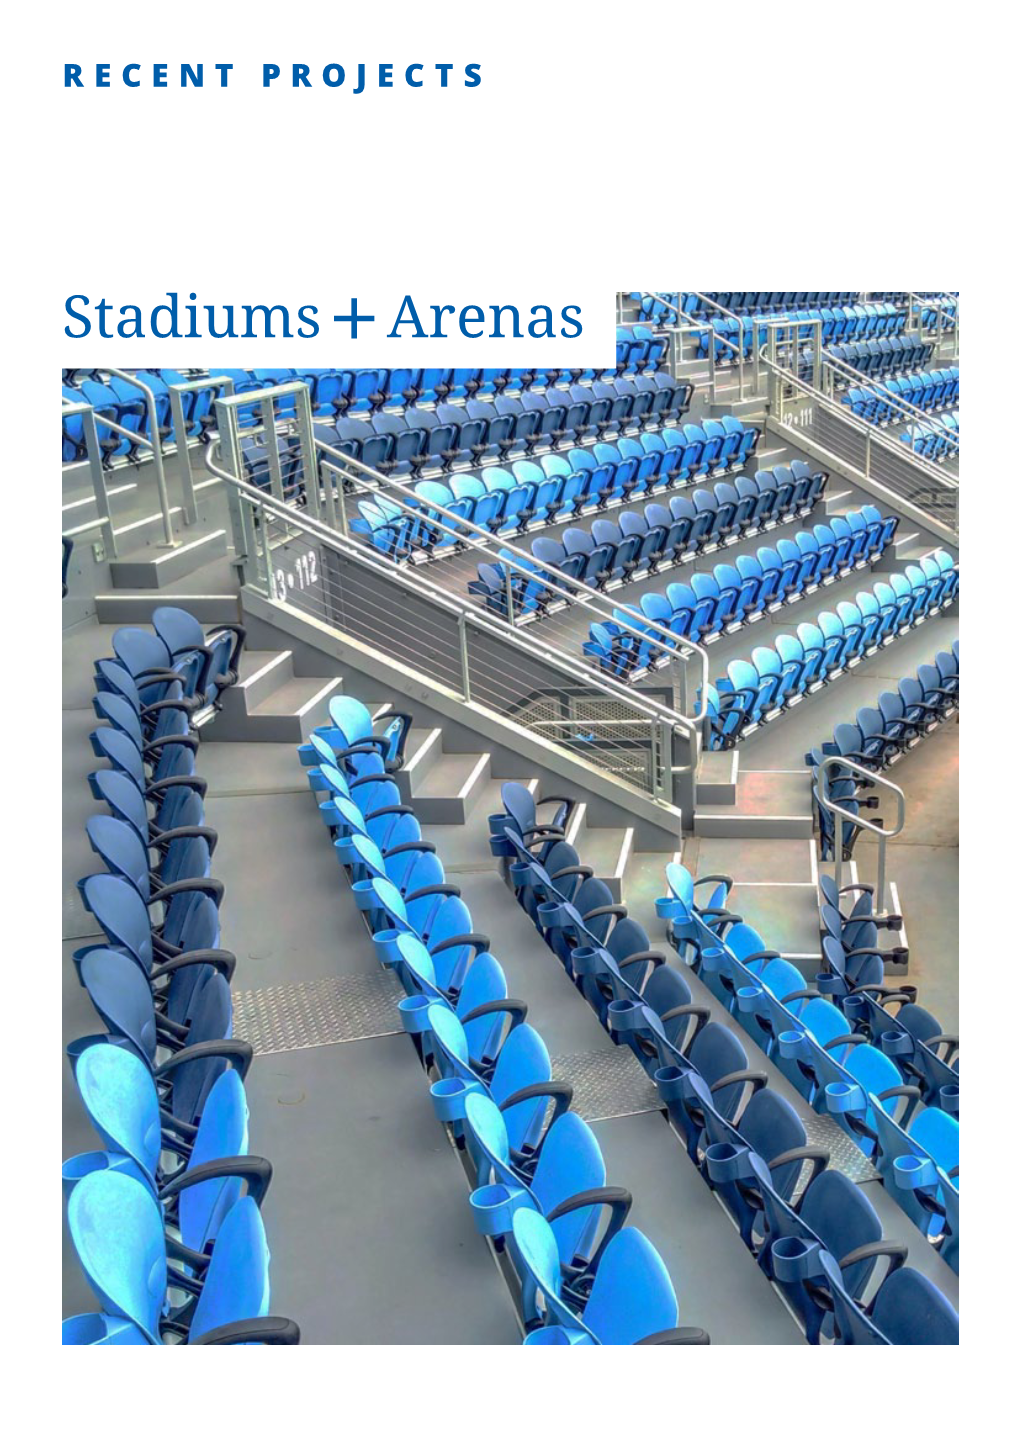 Recent Projects Stadiums + Arenas